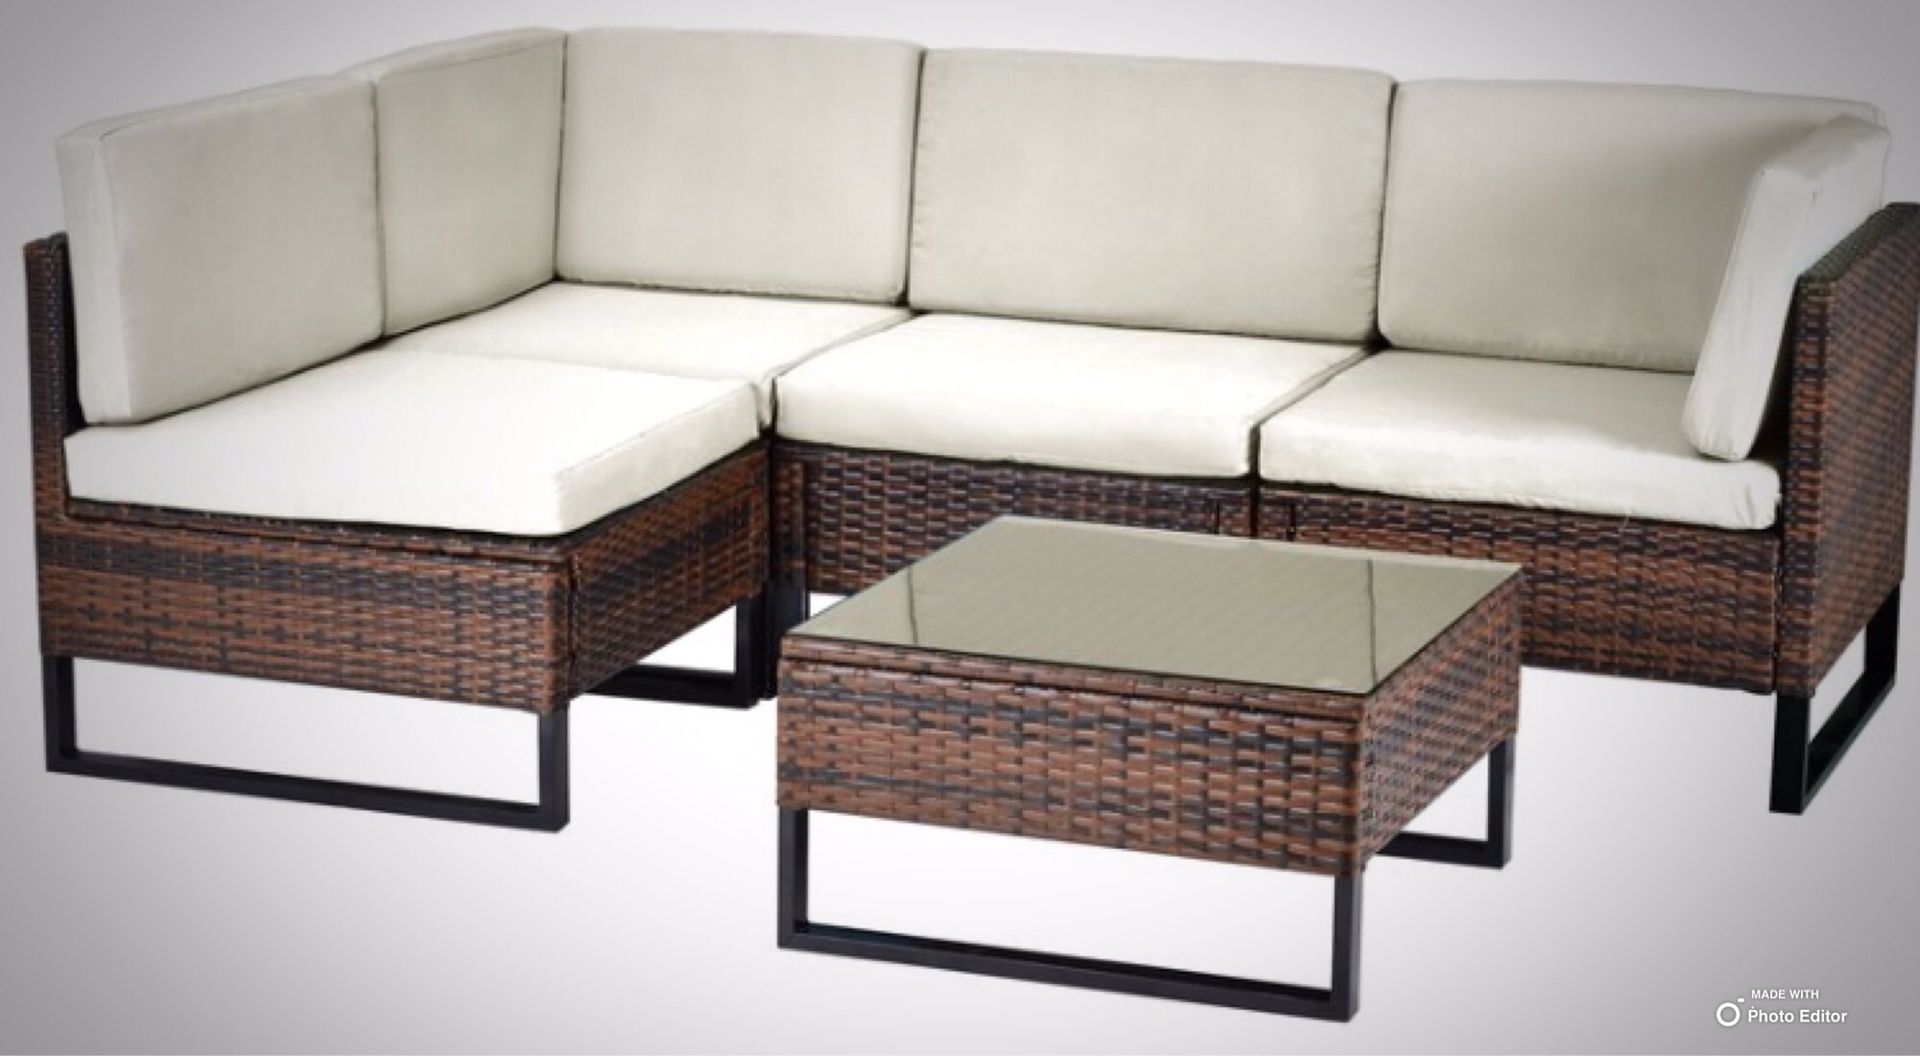 New!! 5Pc Patio Set, Outdoor Couch,Sectional, Backyard Chairs,Coffee Table-Light Grey